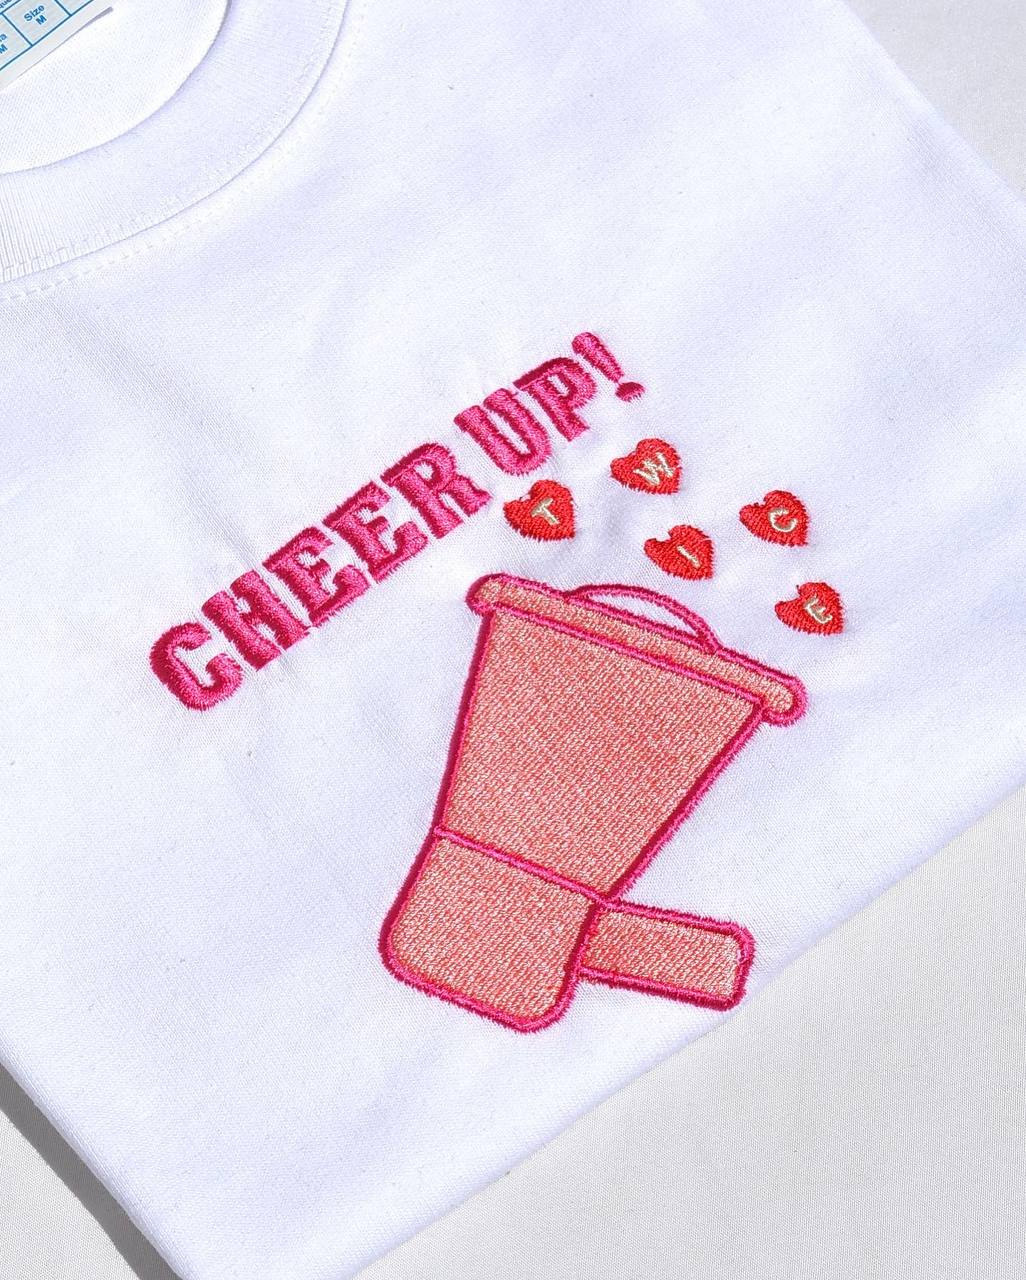 CHEER UP TWICE embroidered shirt